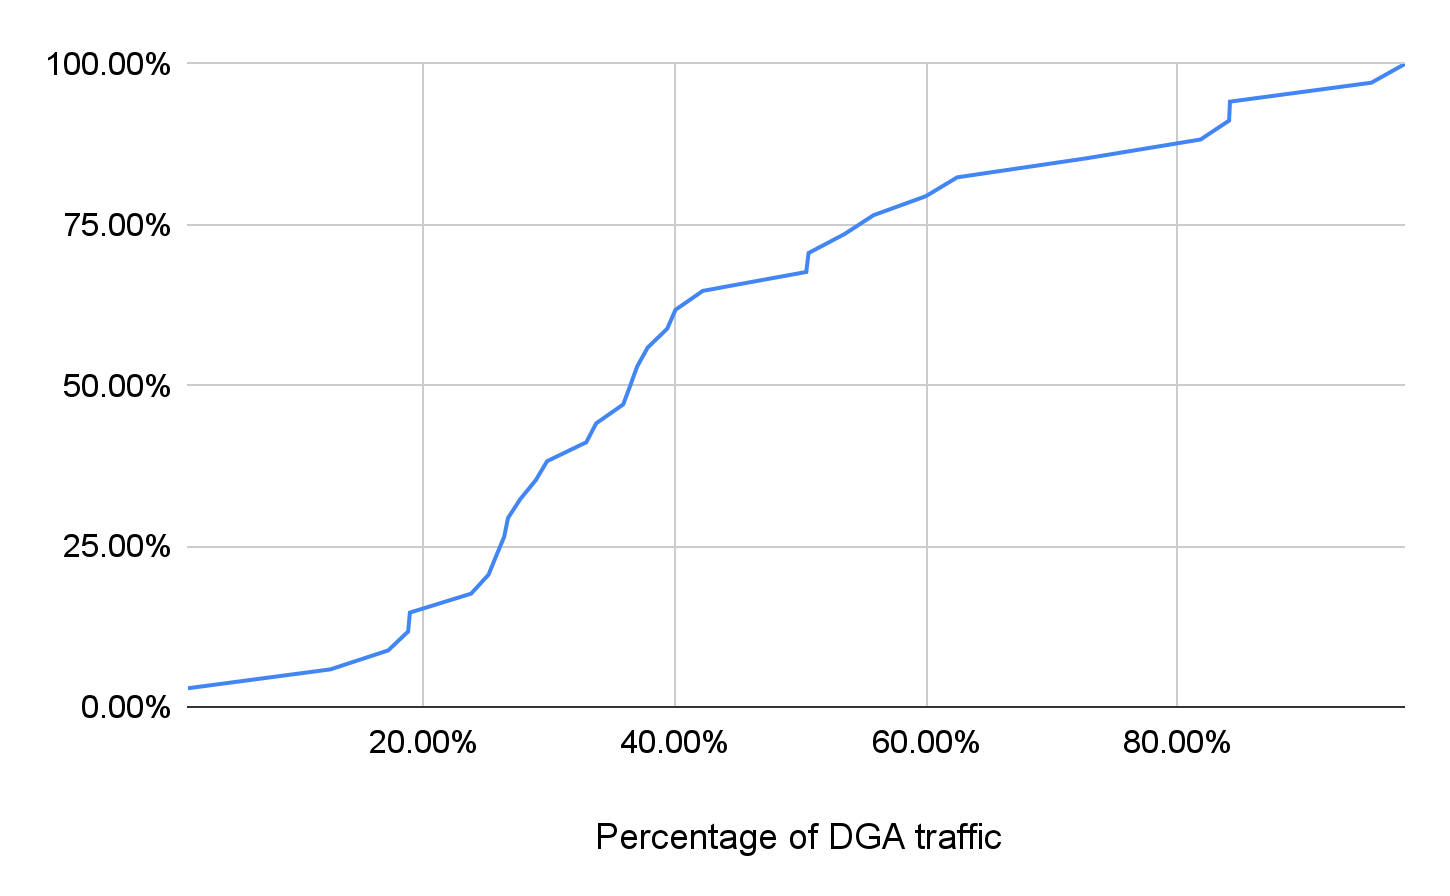 This shows the cumulative distribution figure of detected domains' DGA traffic percentage after waking up. The DGA traffic rate is higher than 36.76% for half of these domains.